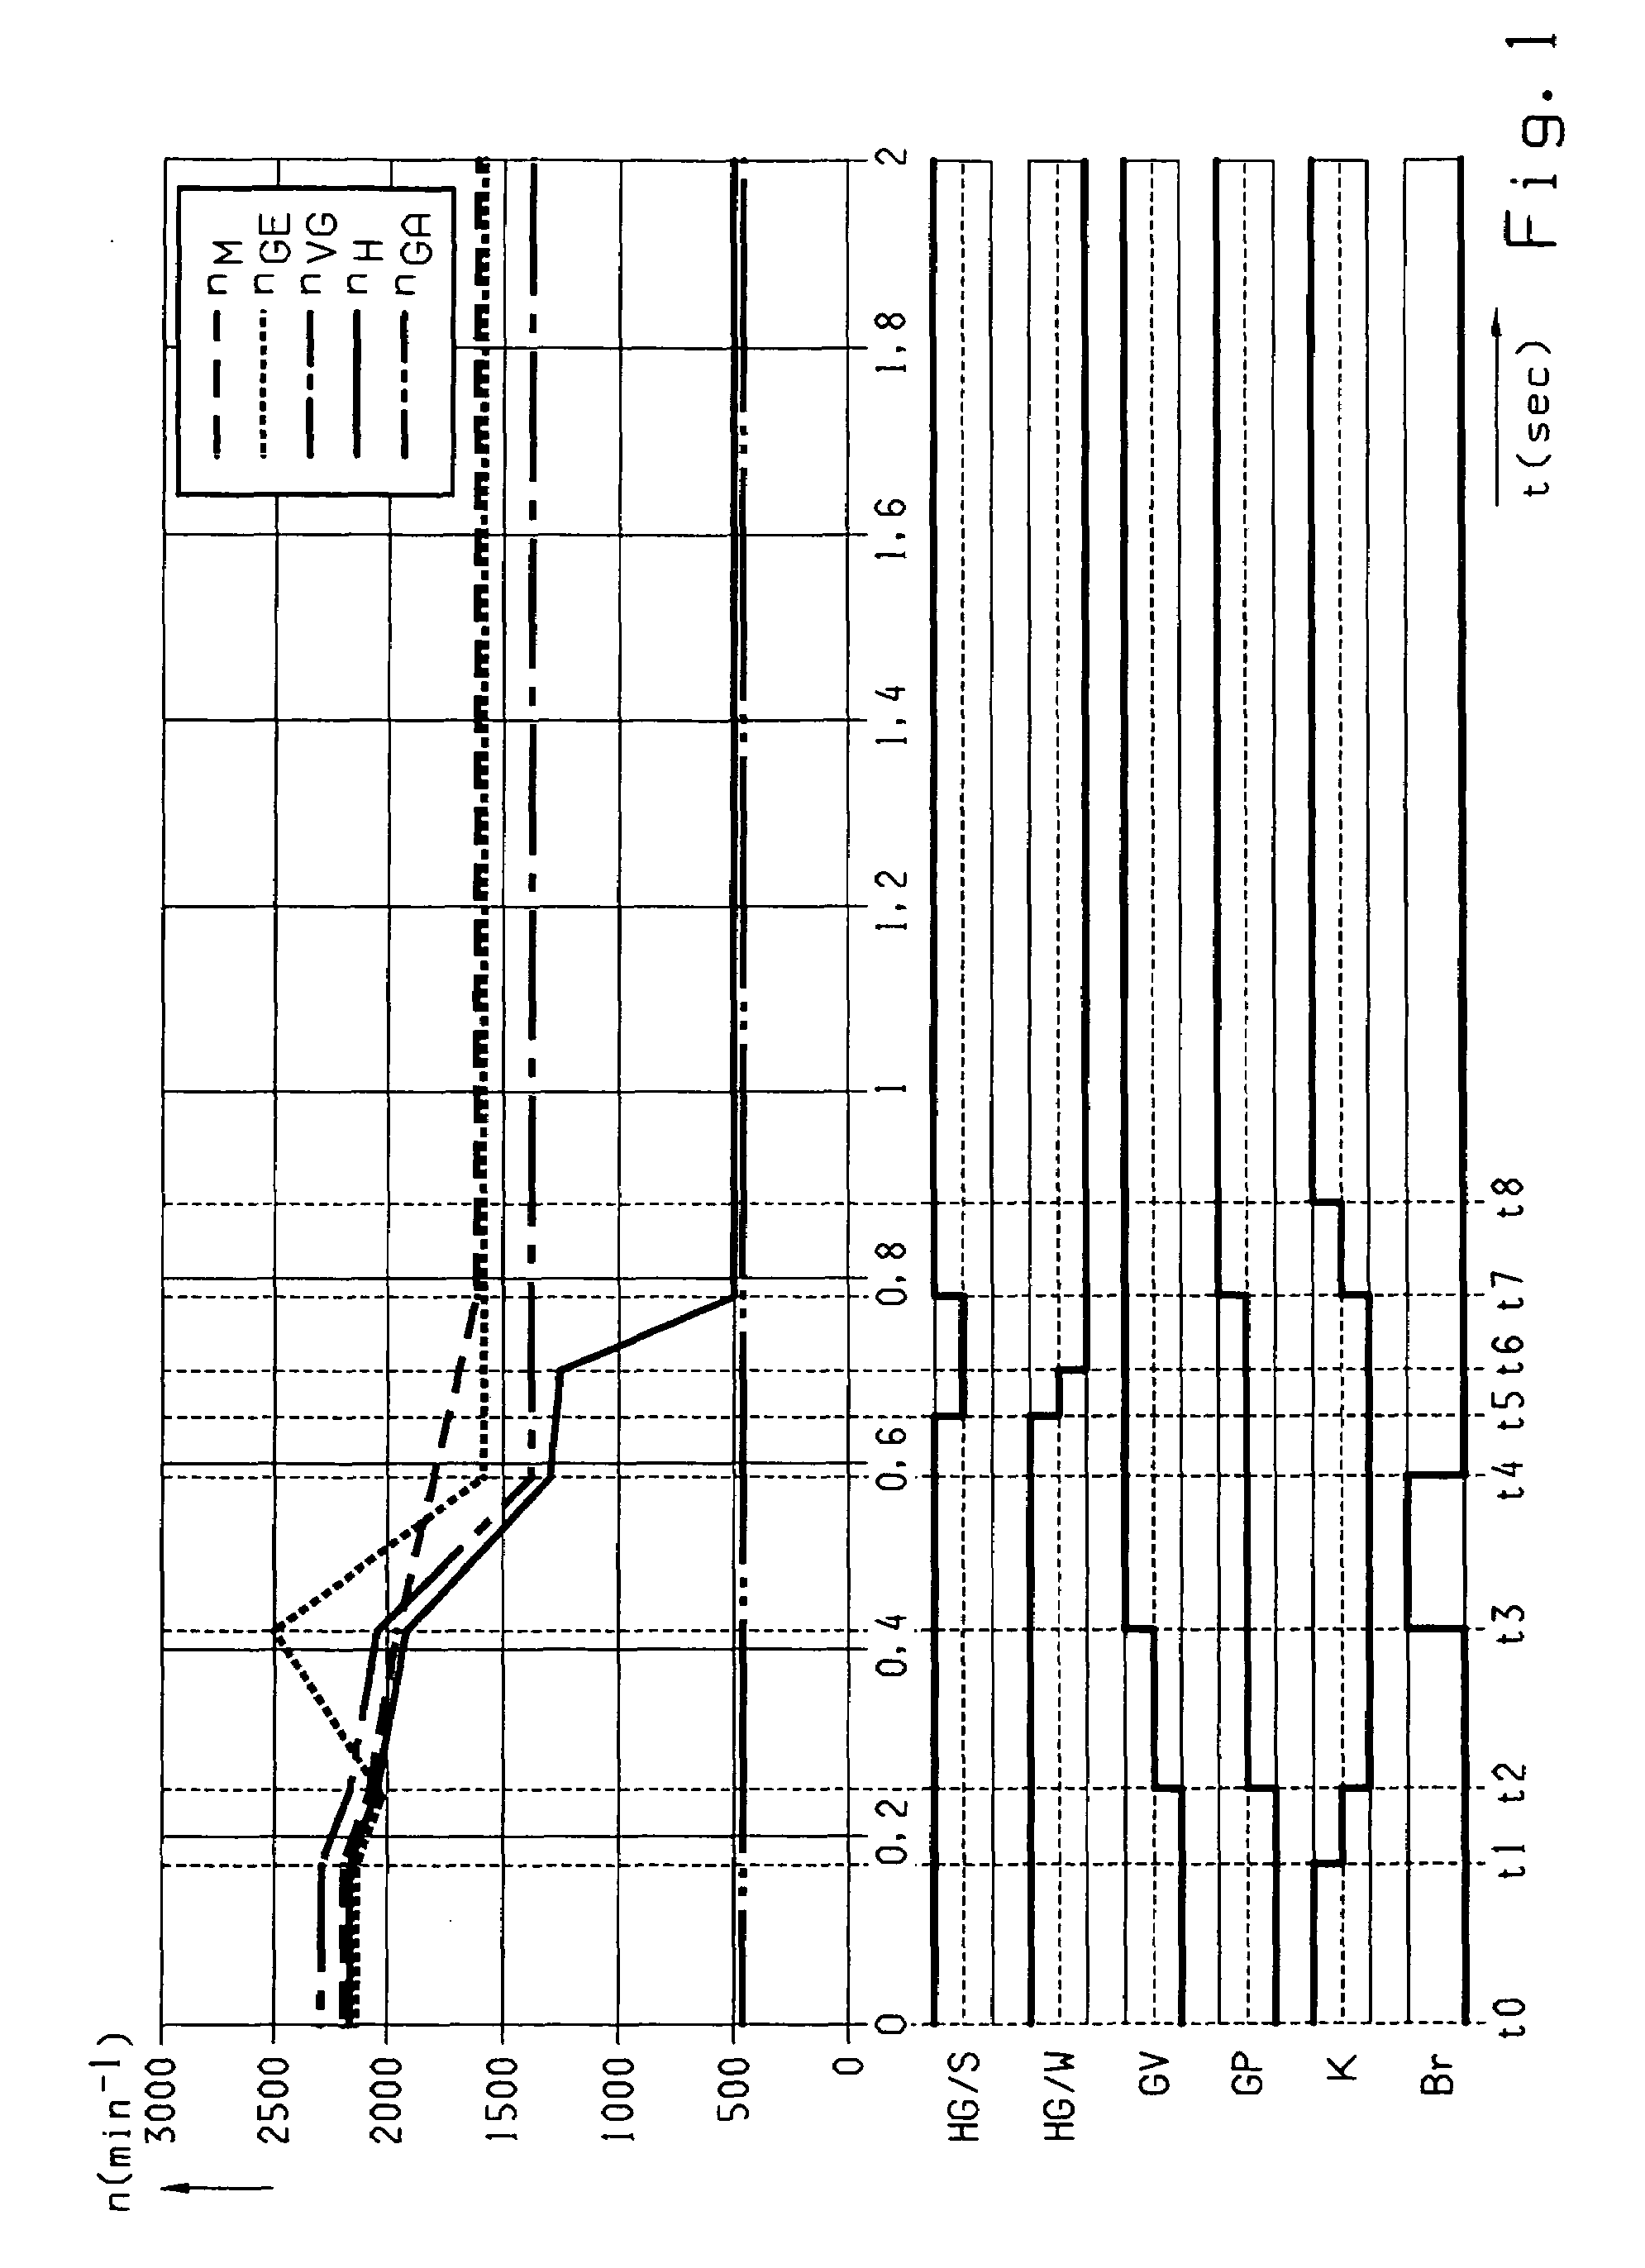 Method for shifting actuation of an automated group transmission